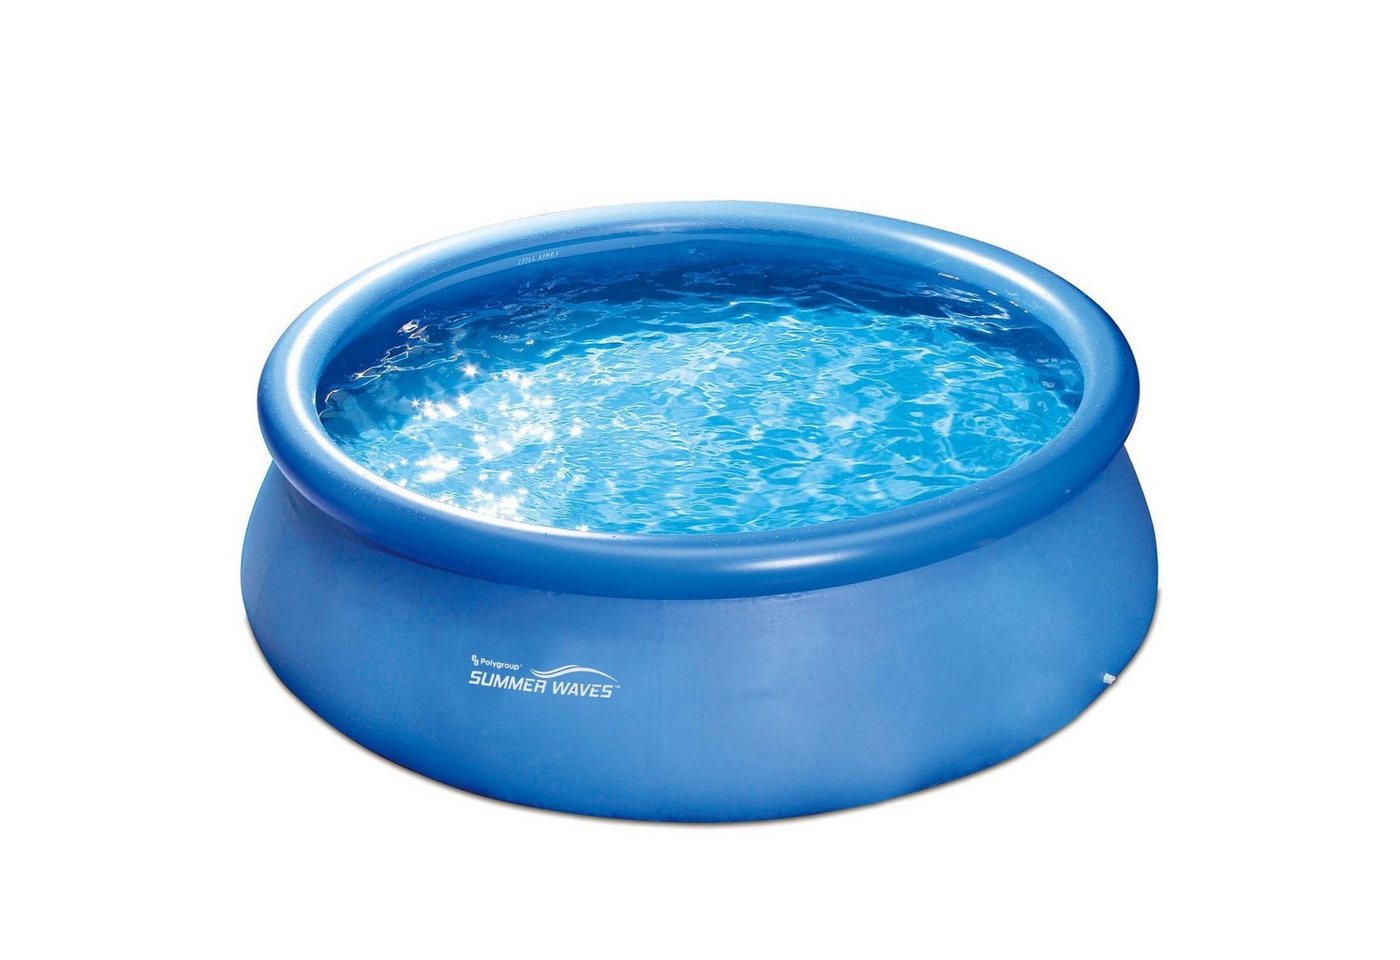 SUMMER WAVES Quick-Up Pool Fast Set, Pool 366x91cm Swimming Pool Familien Schwimmbad mit Filterpumpe von SUMMER WAVES